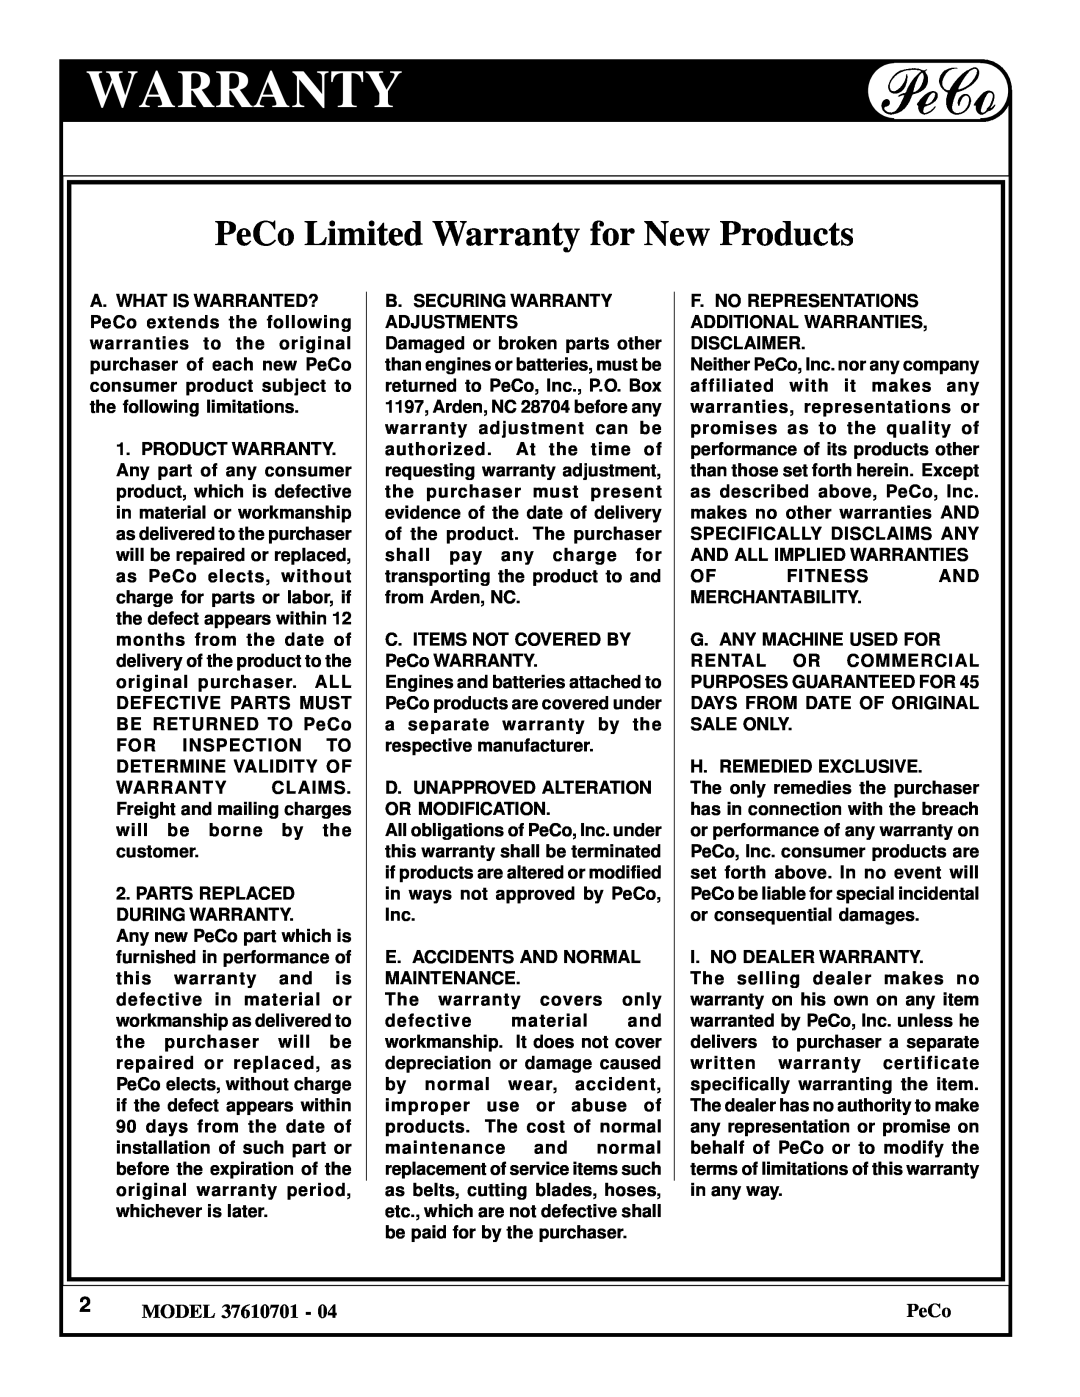 Briggs & Stratton 37610701 - 04 owner manual PeCo Limited Warranty for New Products, Model 